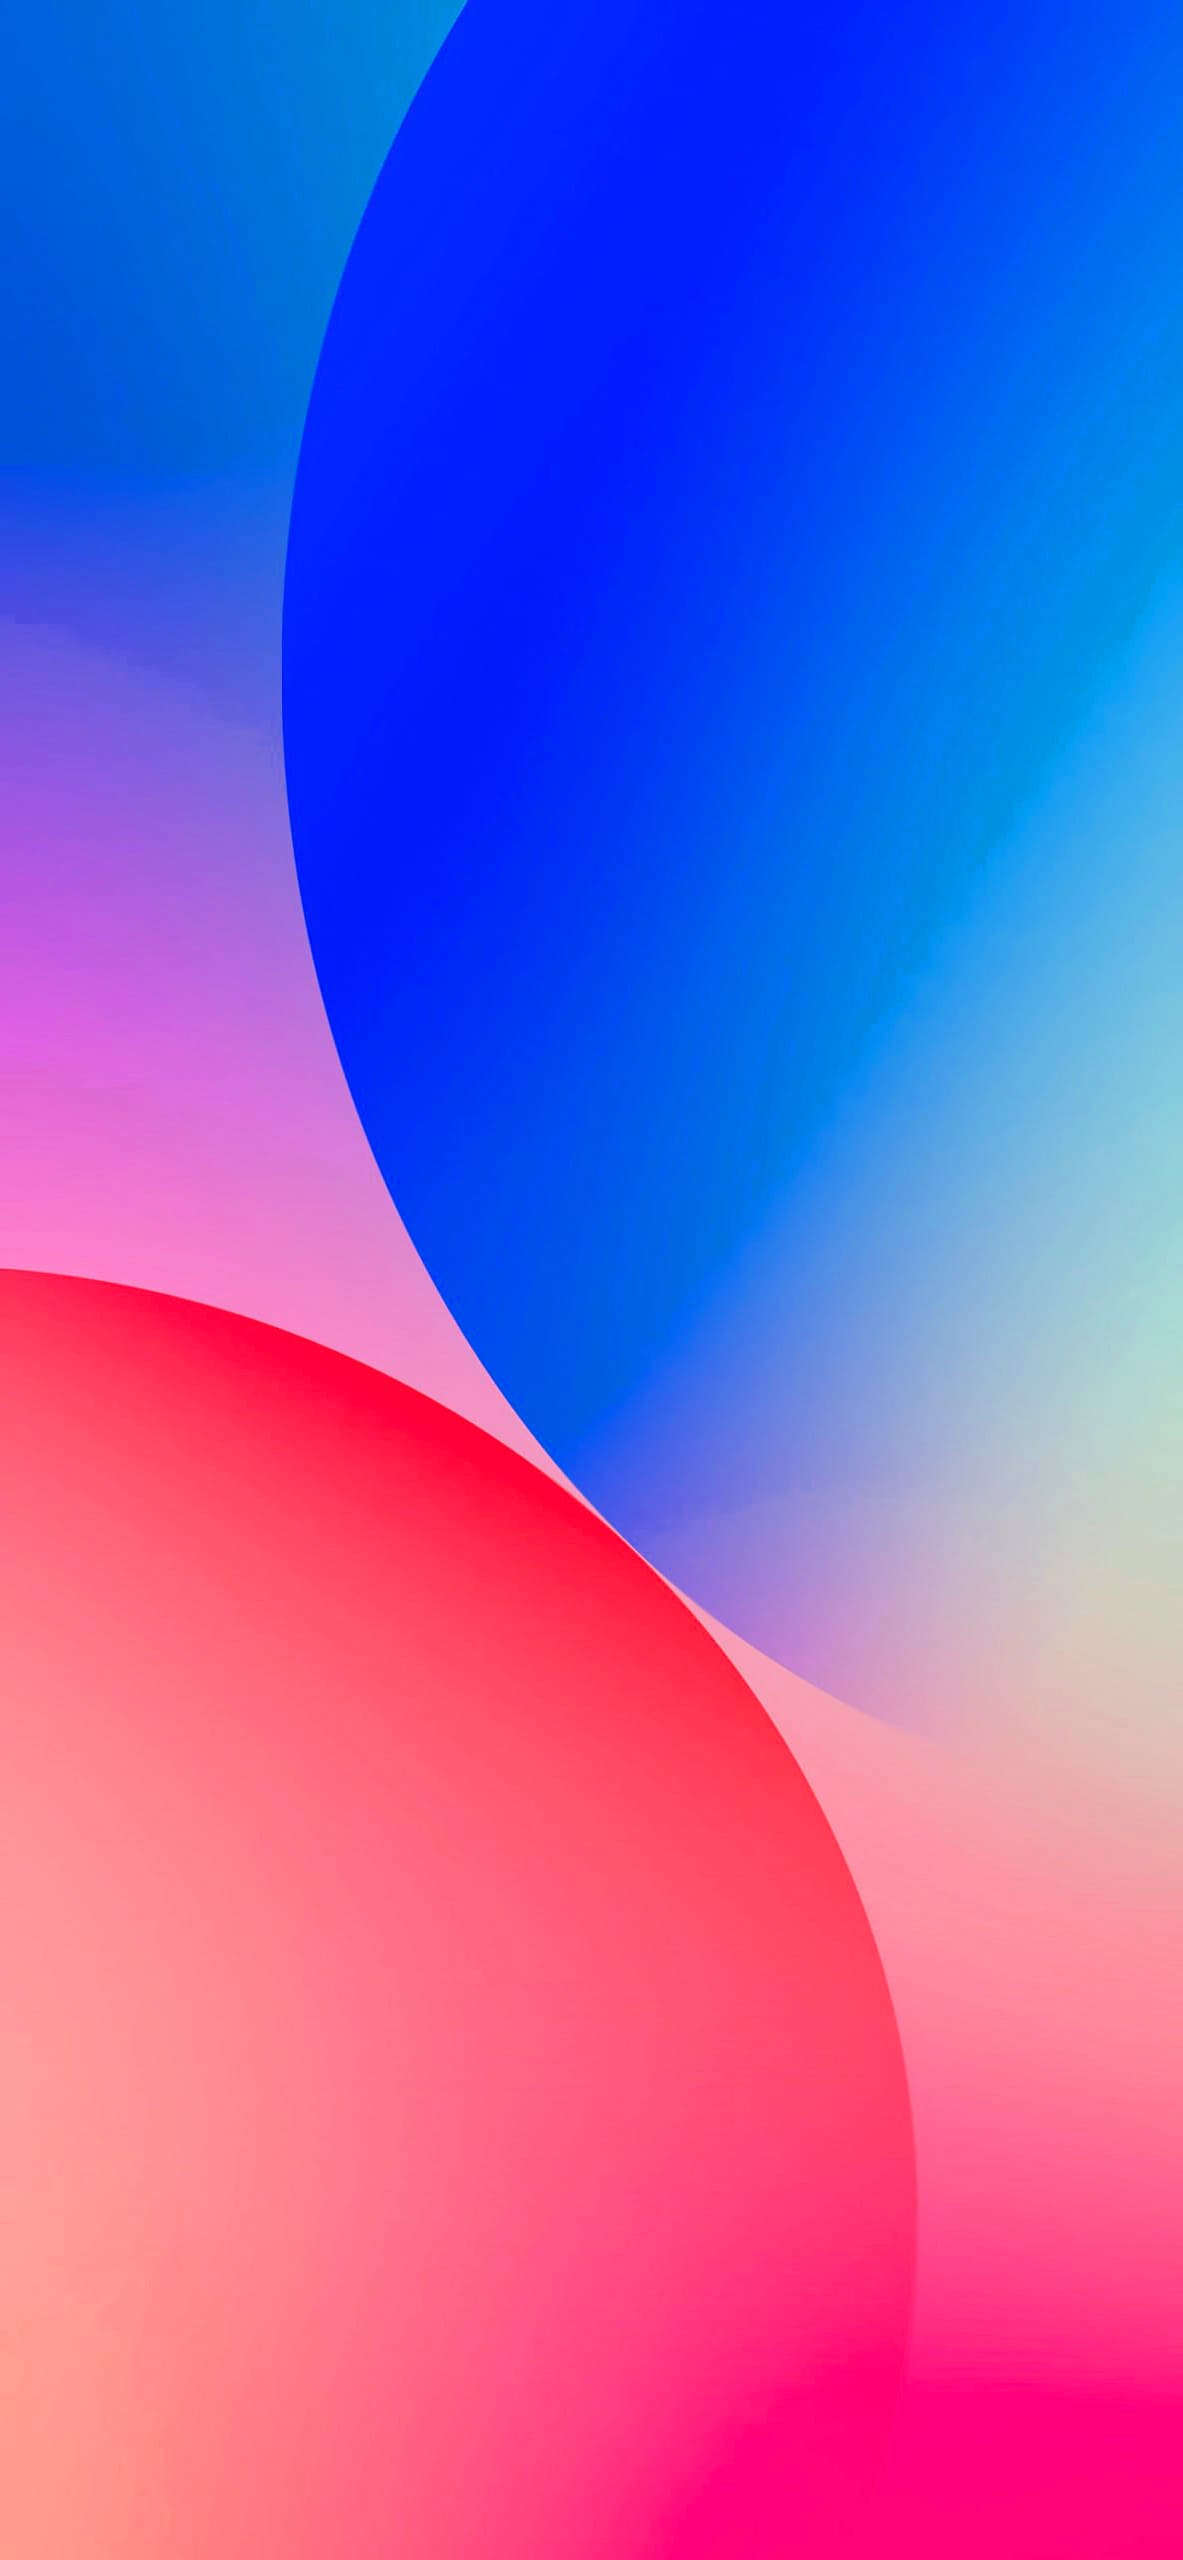 iOS 17 Wallpapers